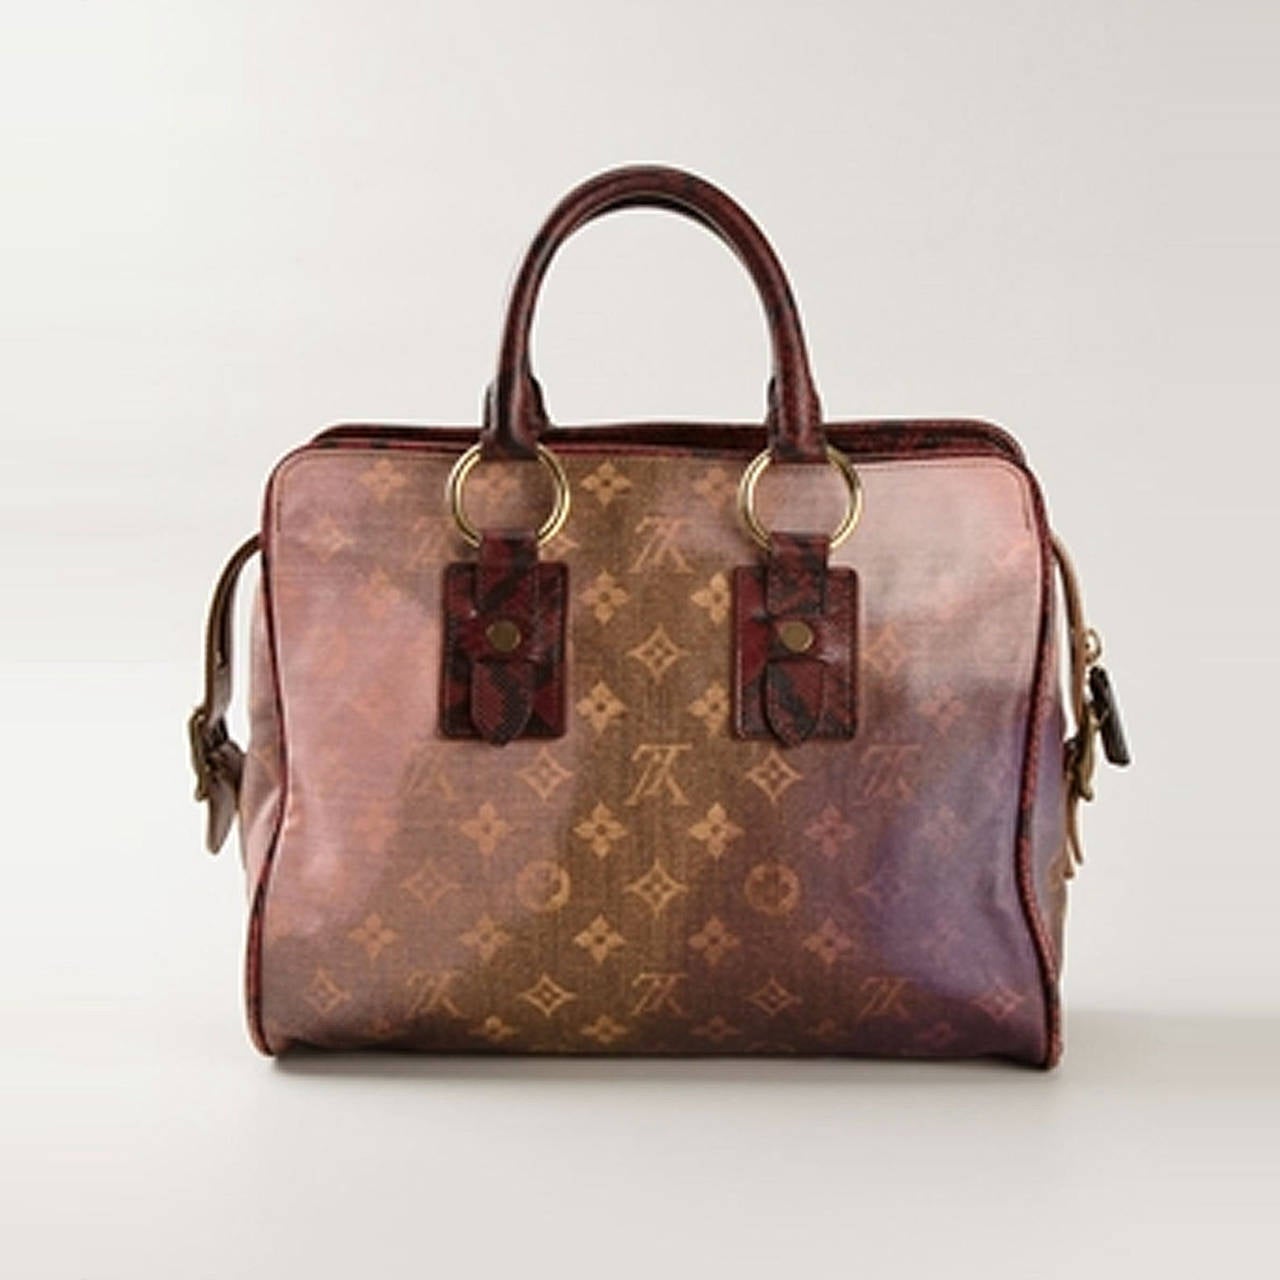 Born out of a collaboration between Louis Vuitton creative head Marc Jacobs and painter/photographer Richard Prince, the bag is part of the Limited Edition Monogram Jokes collection launched in 2008. The graduate bag showcases artistic acid colors